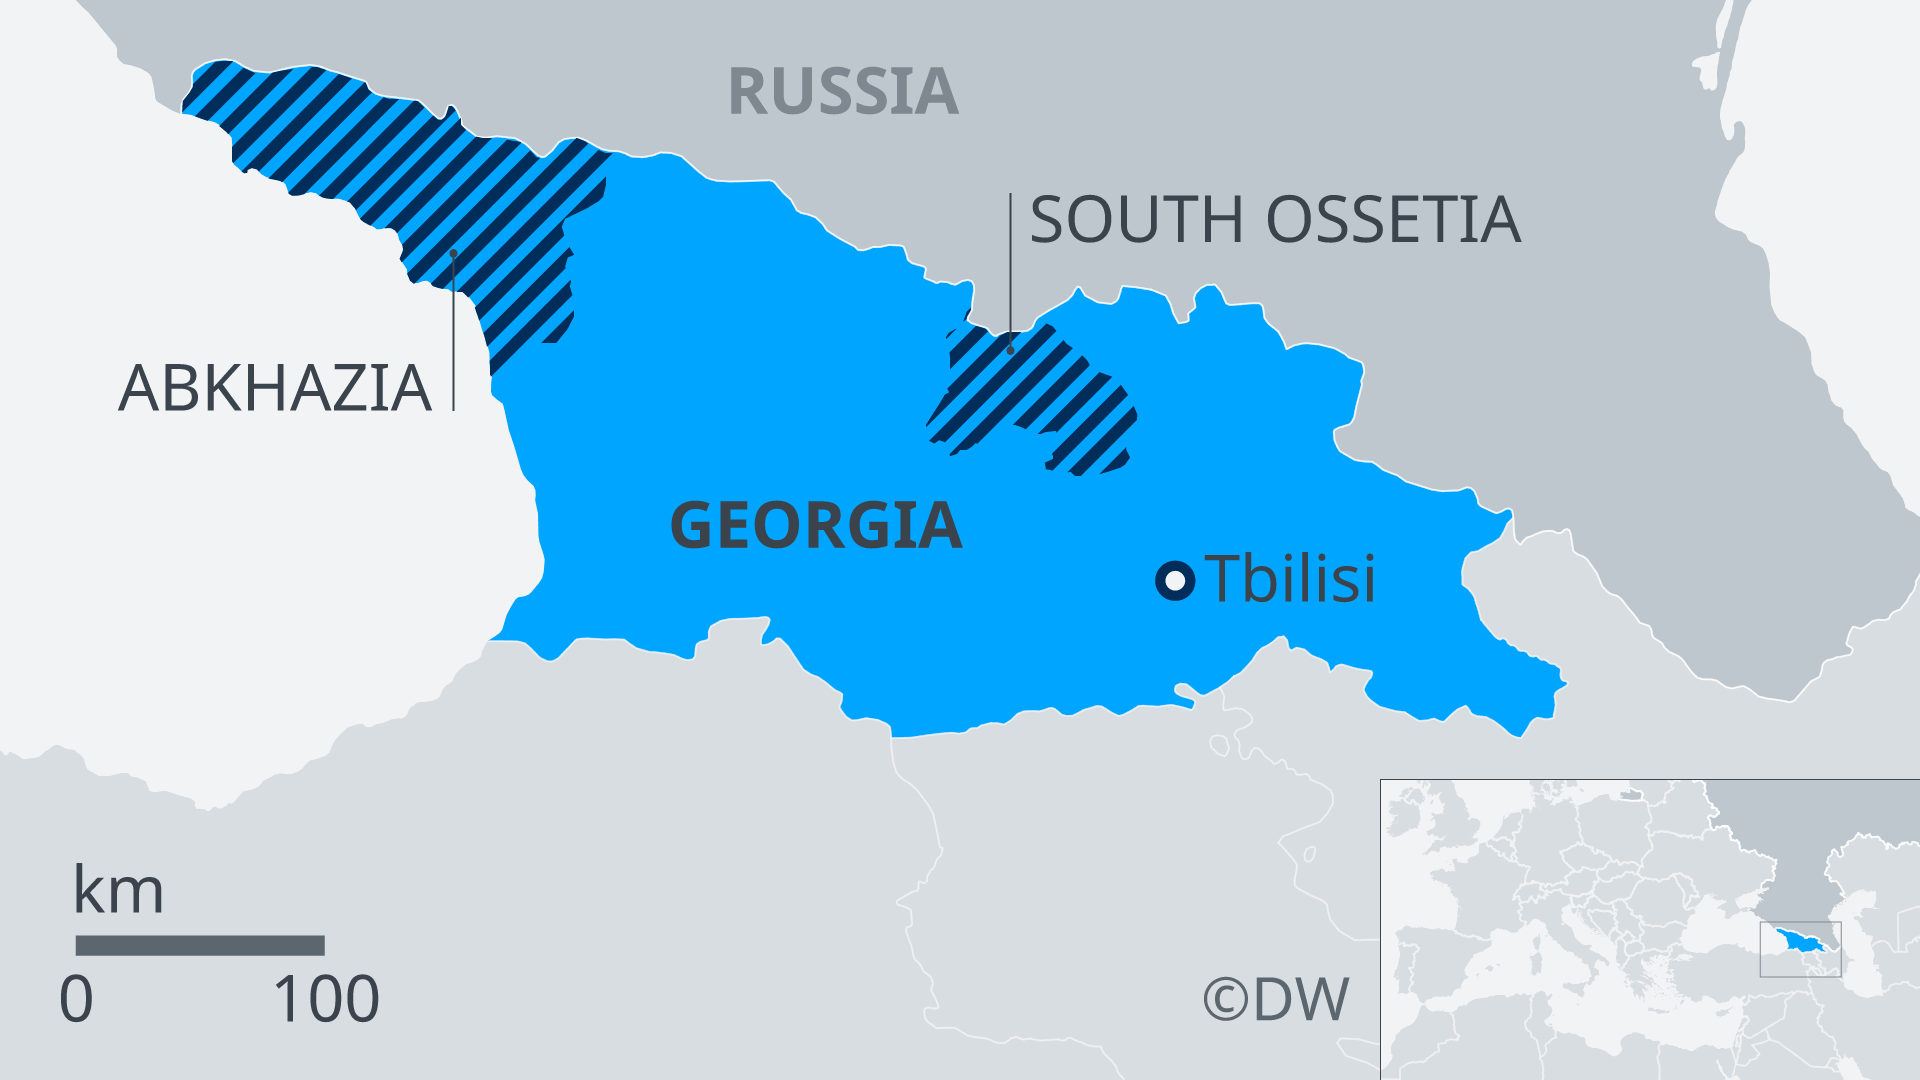 A map showing South Ossetia within Georgia